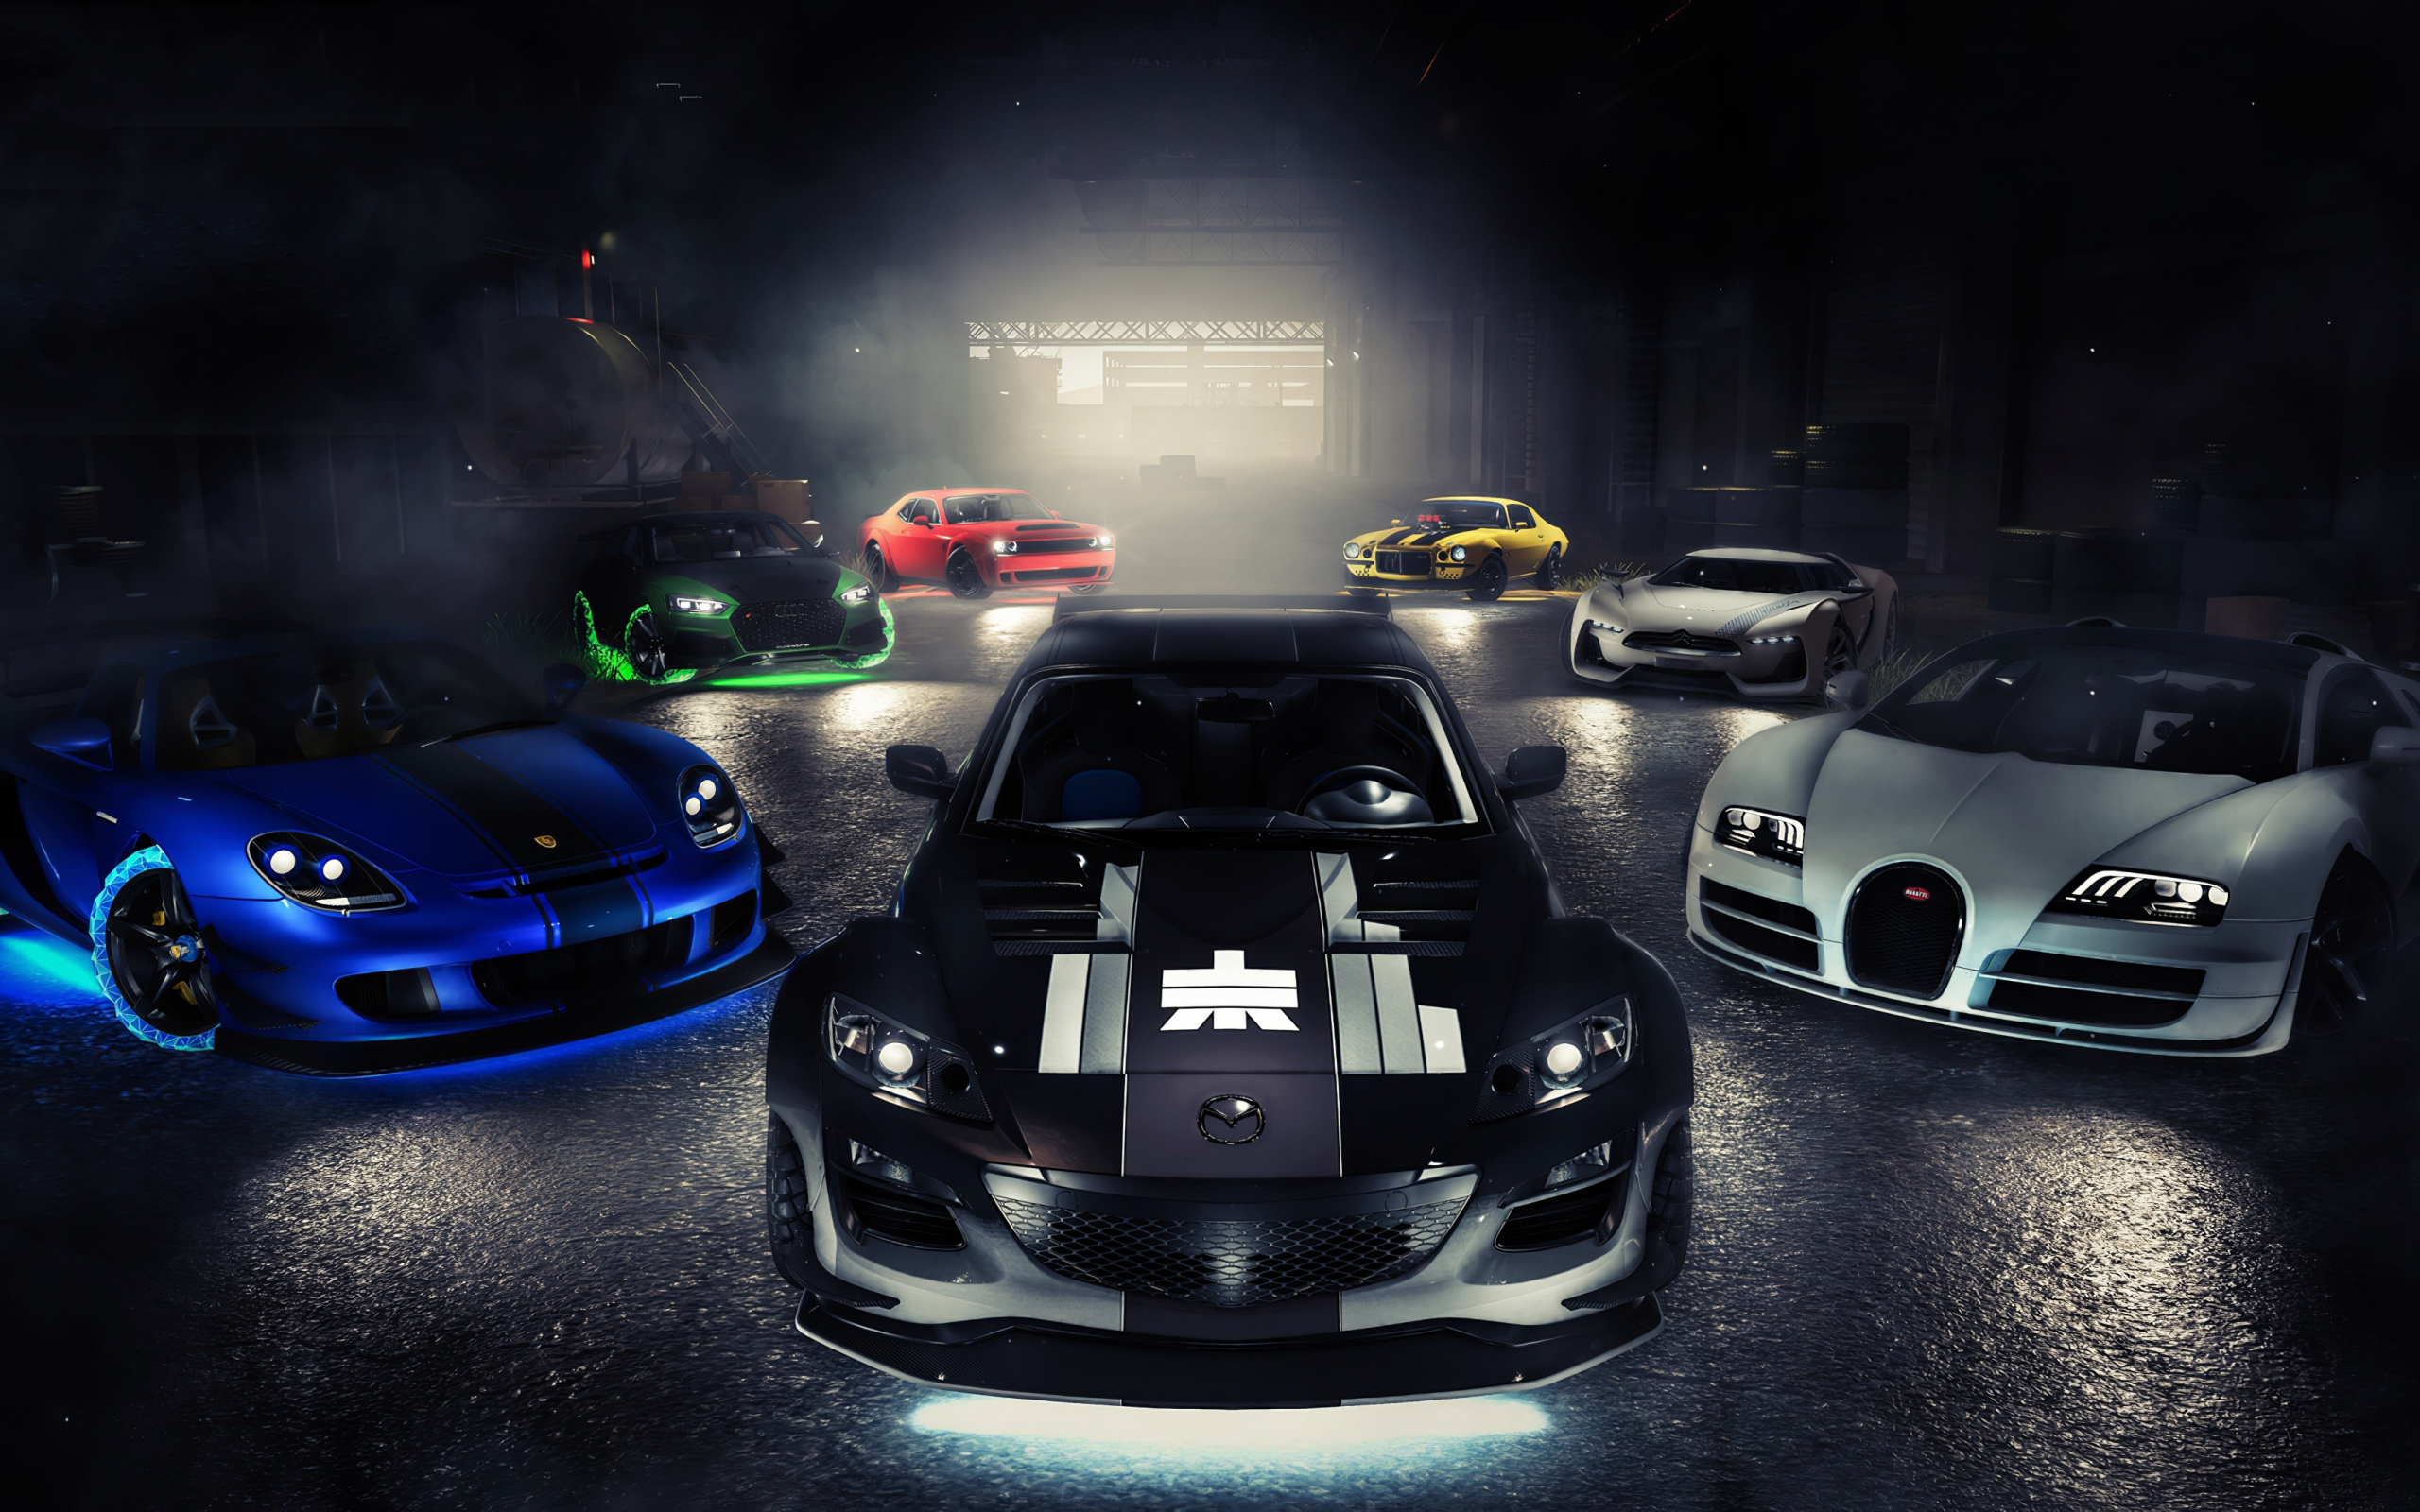 Download wallpaper 2560x1600 the crew 2, video game, drift, nissan, car,  dual wide 16:10 2560x1600 hd background, 8063